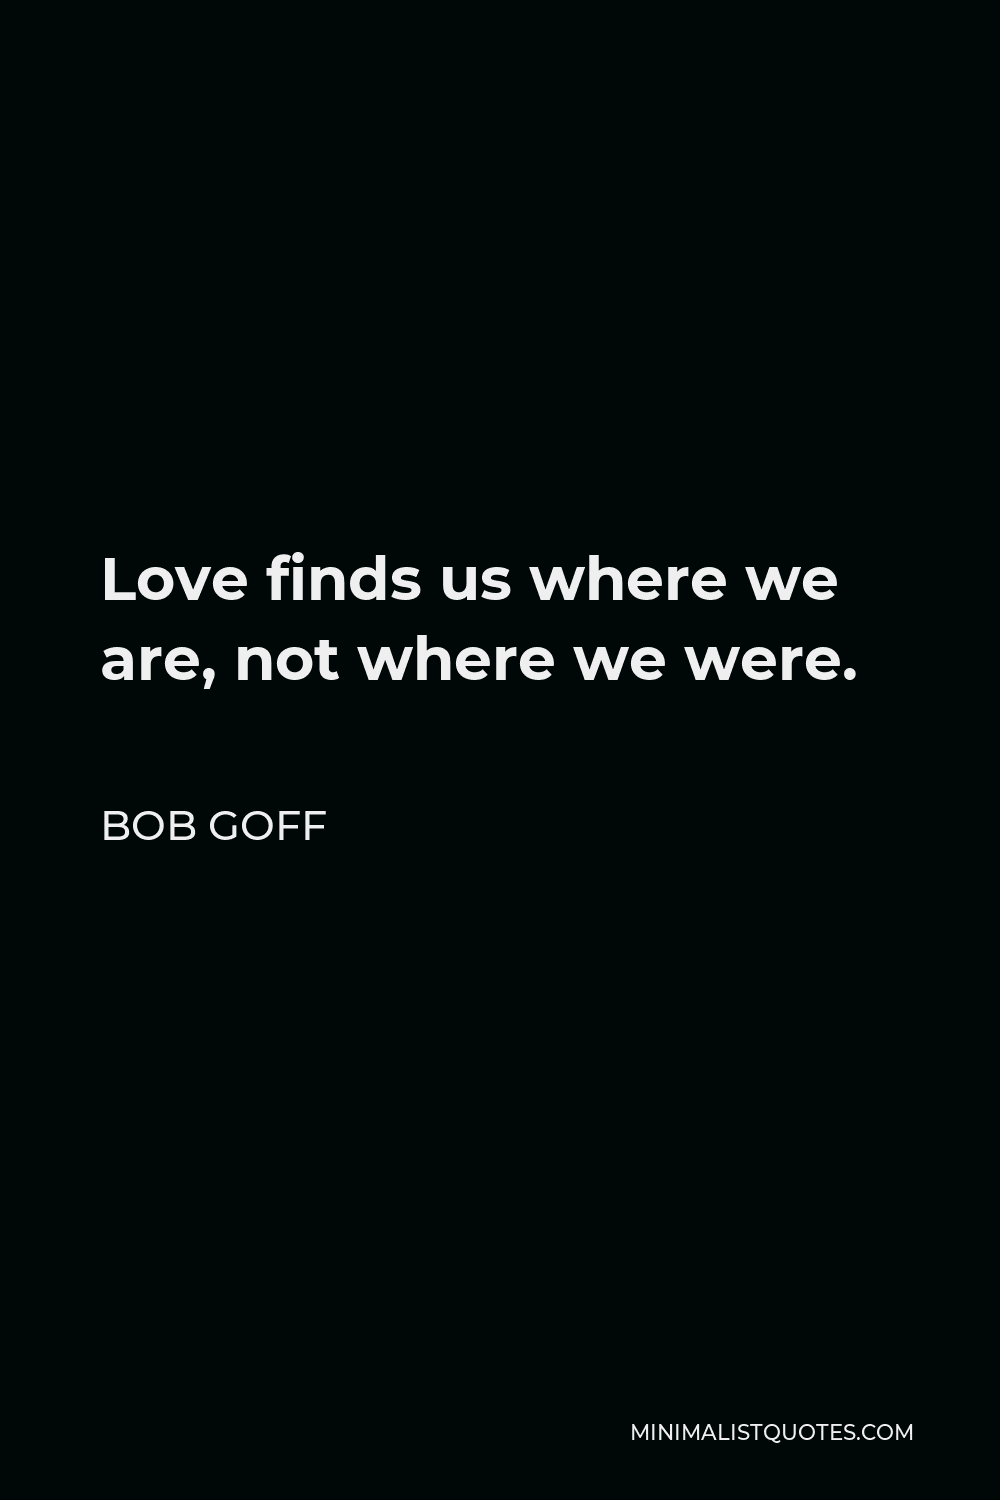 Bob Goff Quote - Love finds us where we are, not where we were.